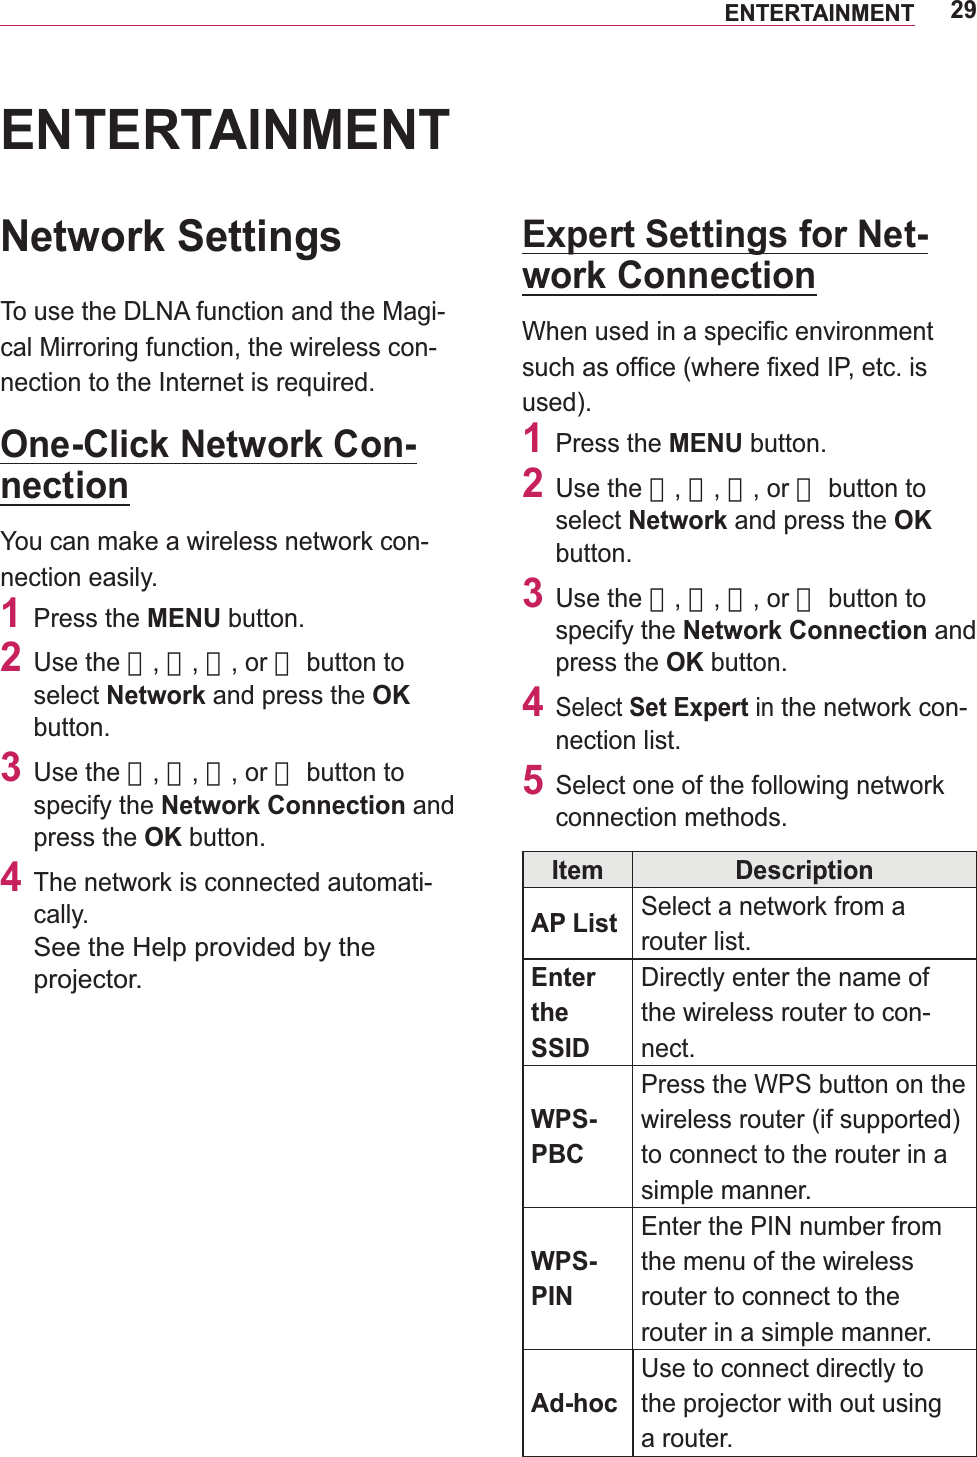 29ENTERTAINMENTENTERTAINMENTNetwork SettingsTo use the DLNA function and the Magi-cal Mirroring function, the wireless con-nection to the Internet is required.One-Click Network Con-nectionYou can make a wireless network con-nection easily.1 Press the MENU button.2 Use the 󱛨, 󱛩, 󱛦, or 󱛧 button to select Network and press the OK button.3 Use the 󱛨, 󱛩, 󱛦, or 󱛧 button to specify the Network Connection and press the OK button.4  The network is connected automati-cally. projector.Expert Settings for Net-work Connectionused).1 Press the MENU button.2 Use the 󱛨, 󱛩, 󱛦, or 󱛧 button to select Network and press the OK button.3 Use the 󱛨, 󱛩, 󱛦, or 󱛧 button to specify the Network Connection and press the OK button.4 Select Set Expert in the network con-nection list.5  Select one of the following network connection methods.Item DescriptionAP List Select a network from a router list.Enter the SSIDDirectly enter the name of the wireless router to con-nect.WPS-PBCPress the WPS button on the wireless router (if supported) to connect to the router in a simple manner.WPS-PINEnter the PIN number from the menu of the wireless router to connect to the router in a simple manner.Ad-hocUse to connect directly to the projector with out using a router.